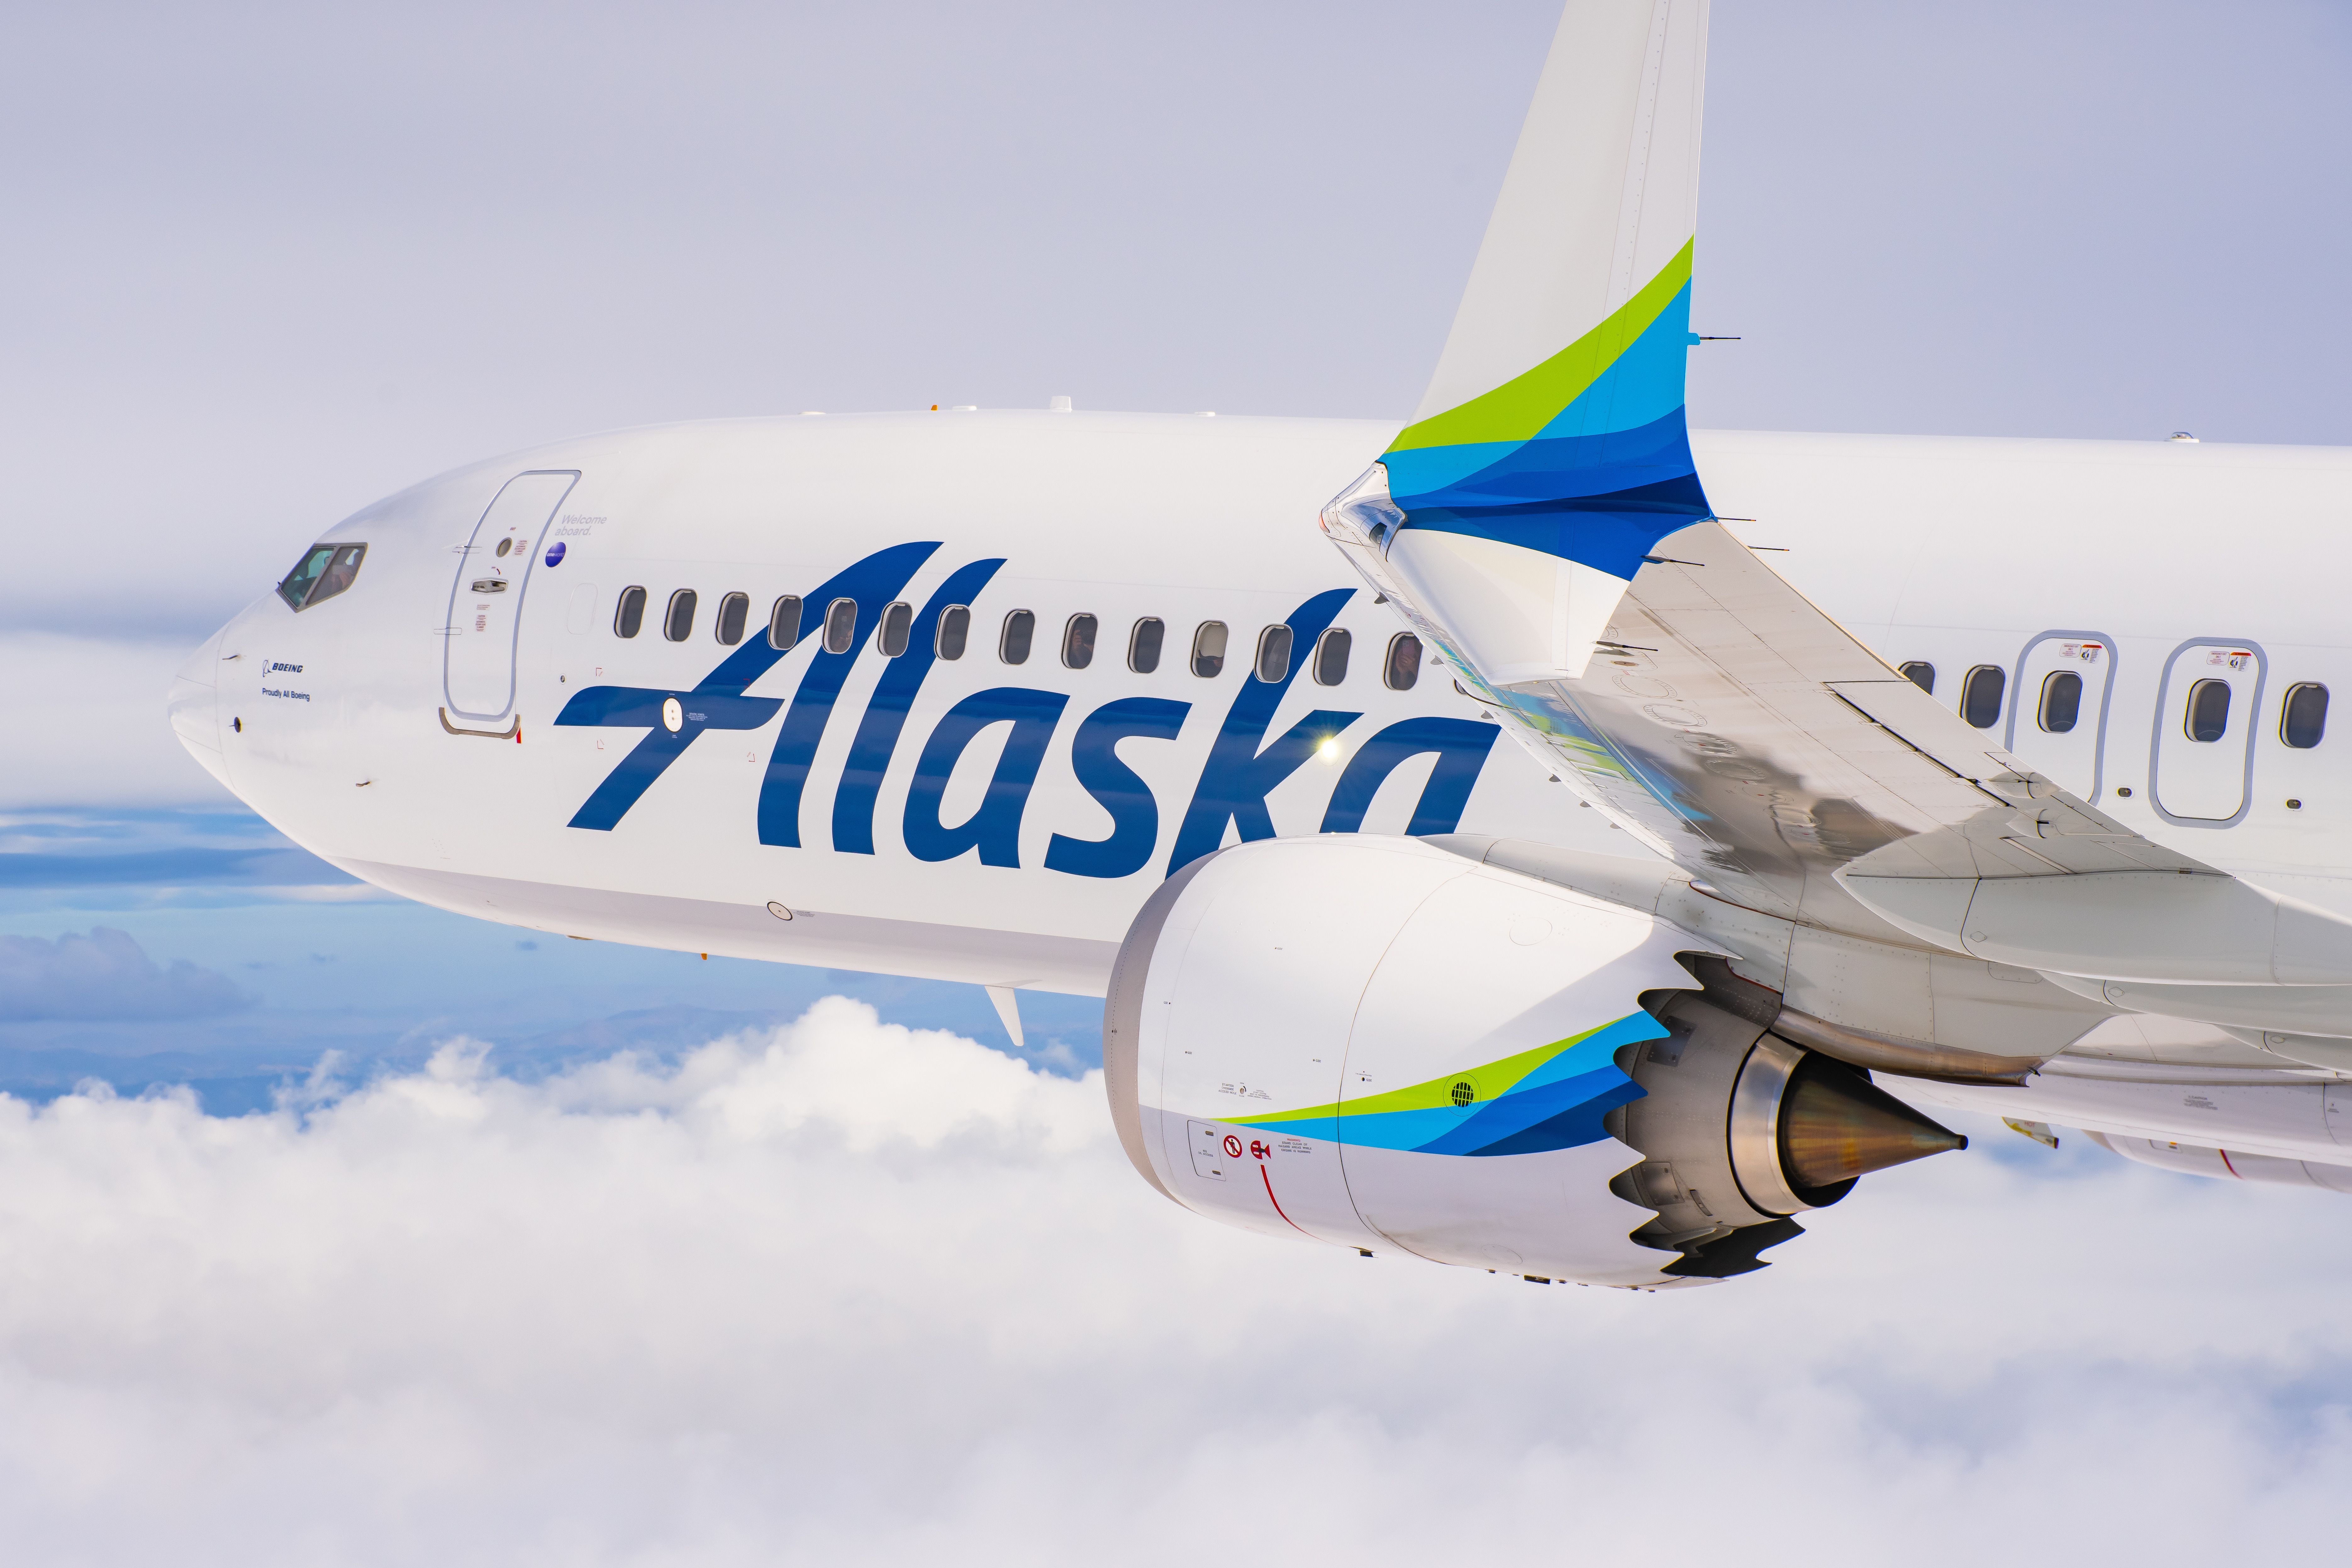 An Alaska Airlines airplane in the clouds